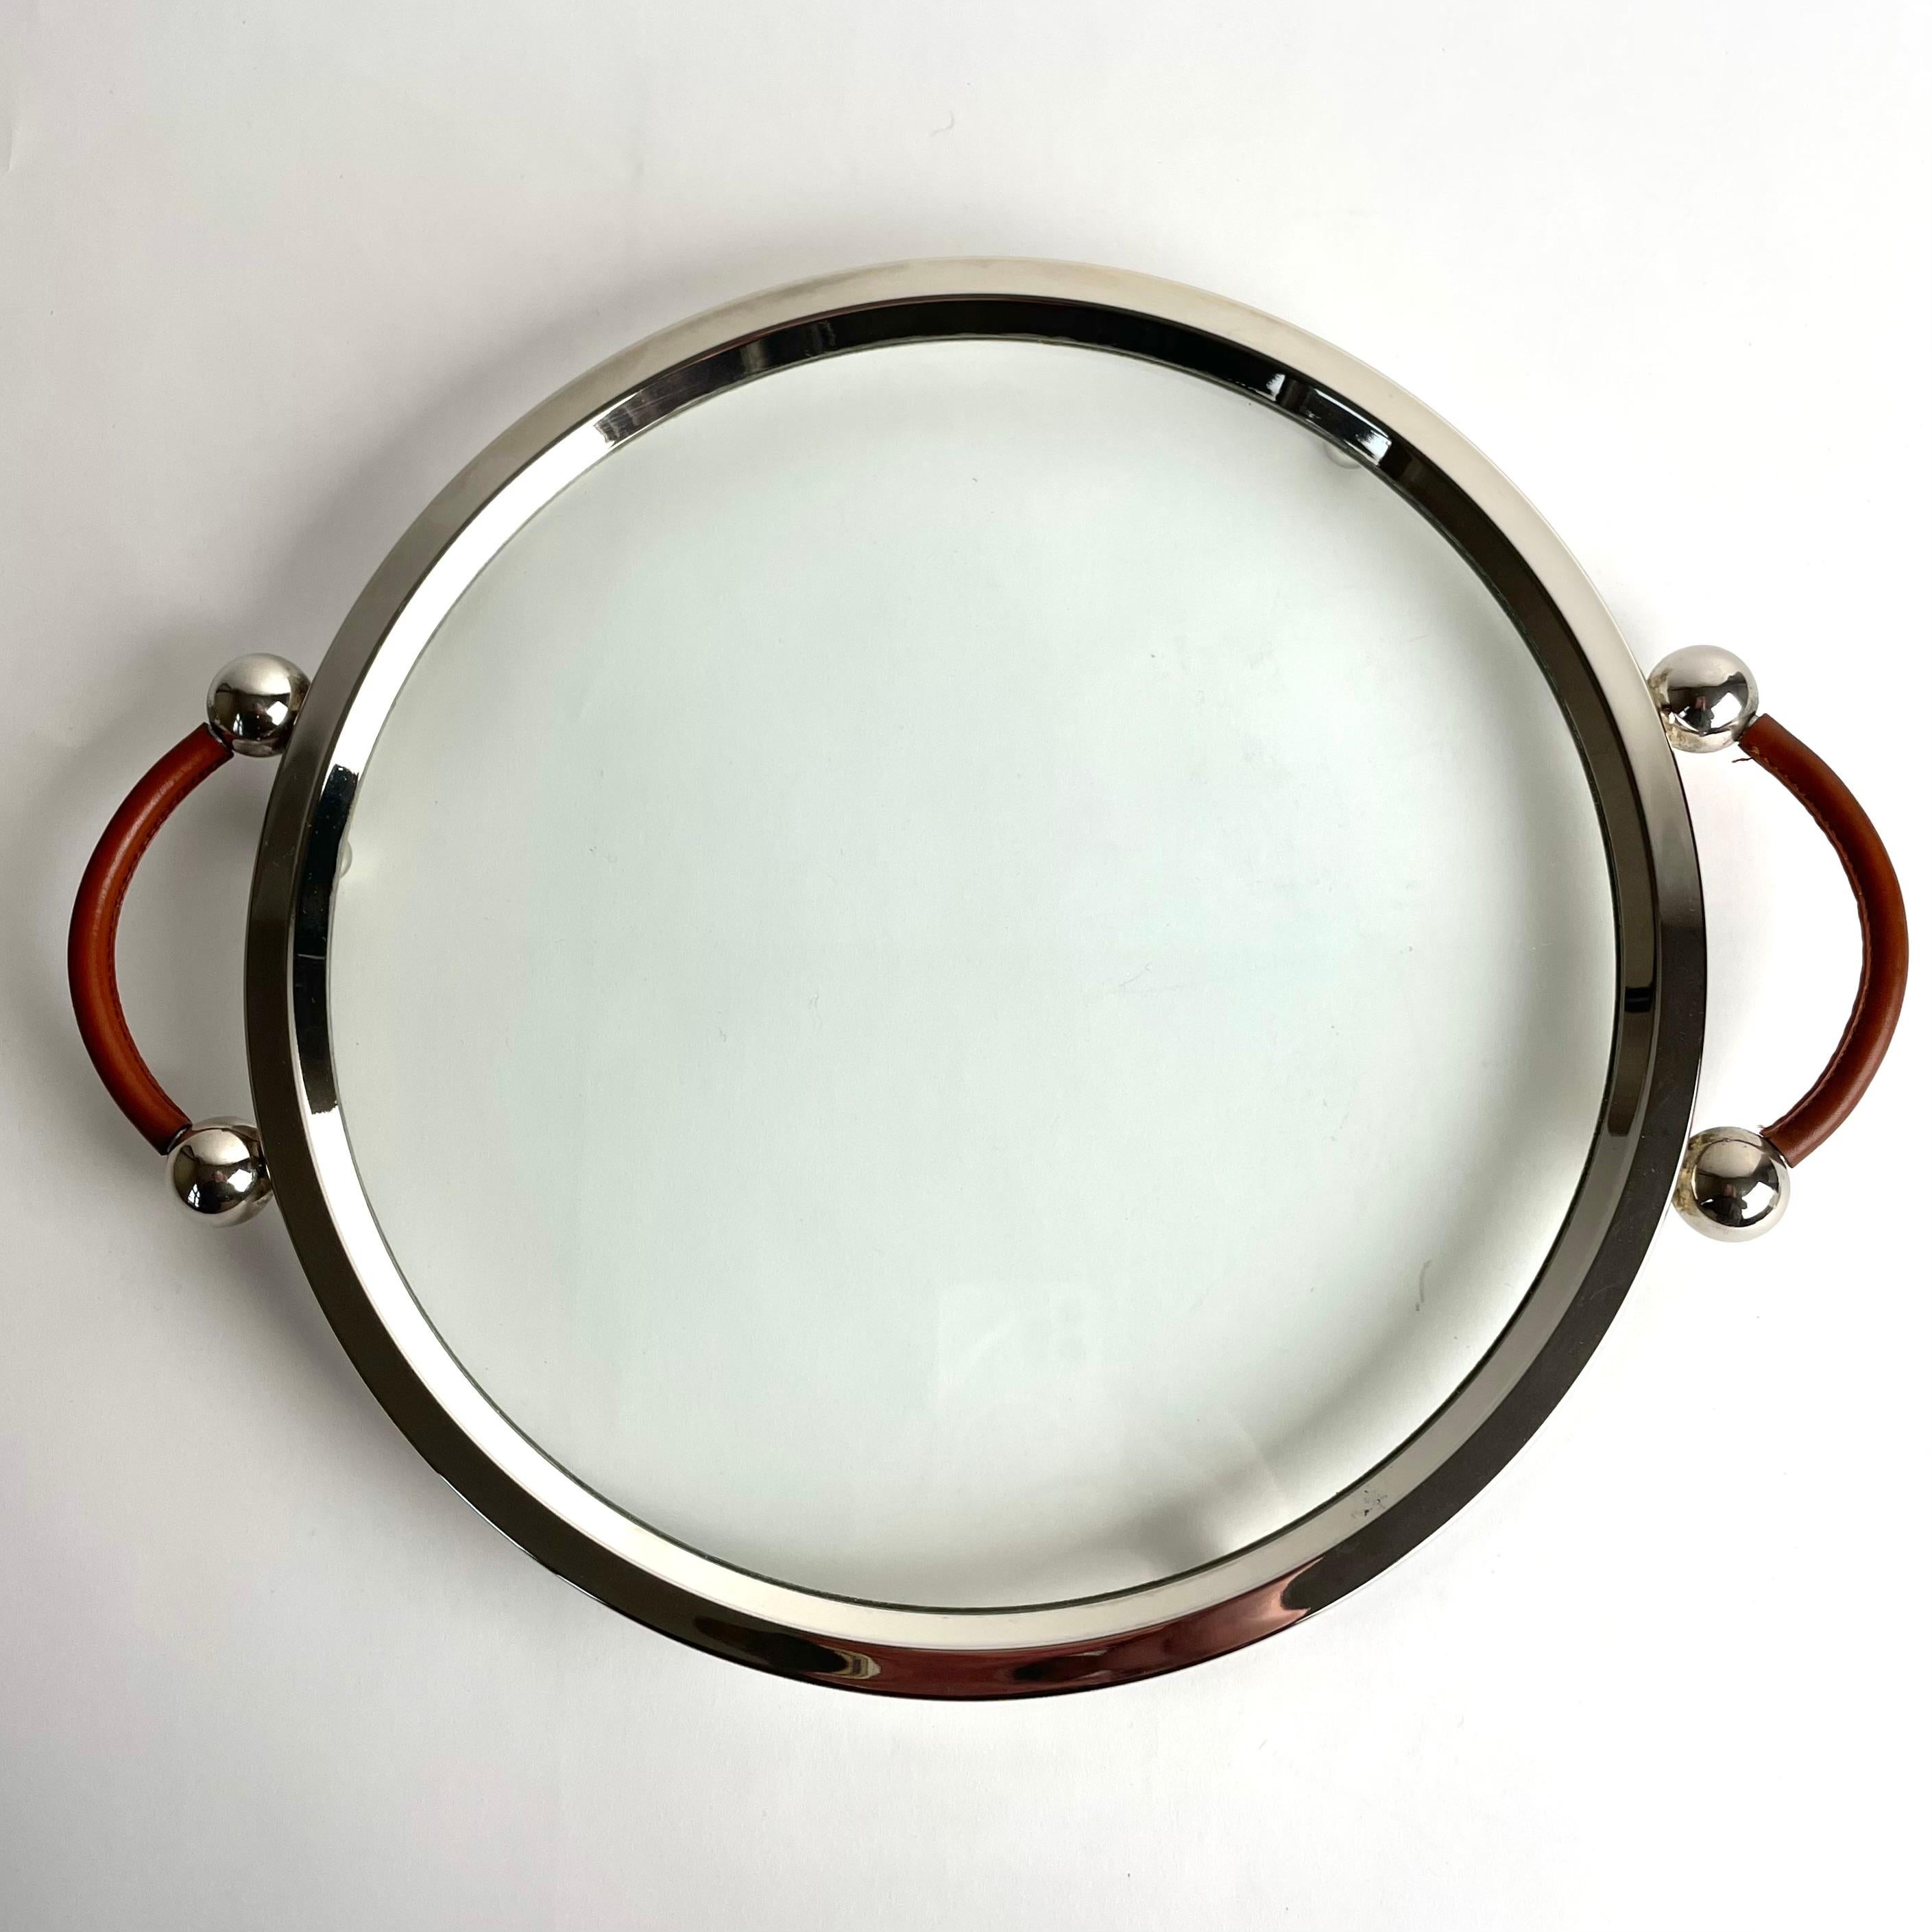 Early 20th Century Elegant Art Deco Cocktail Tray from the 1920s in glass, silver plate and leather For Sale